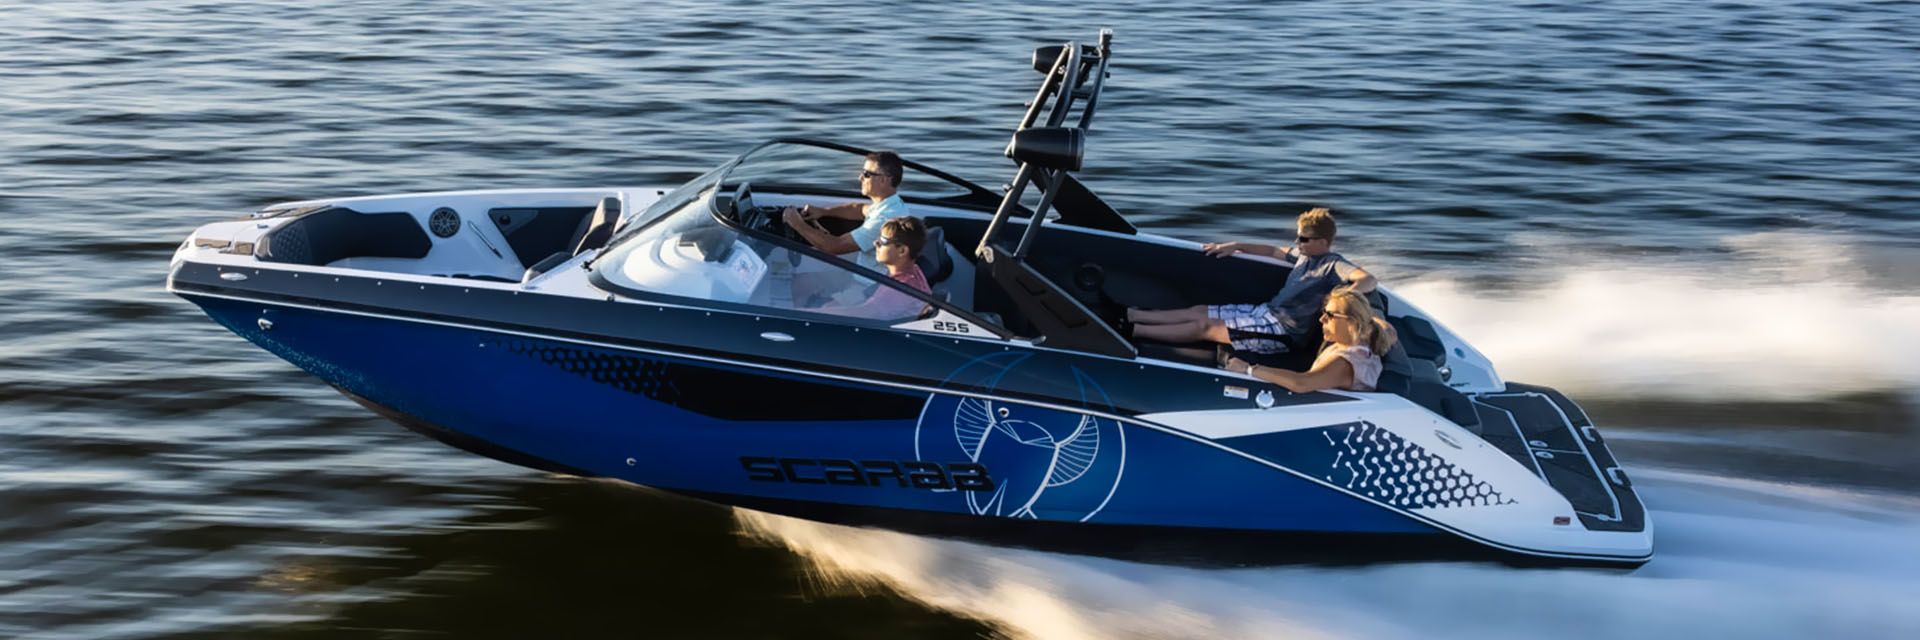 People riding on a Scarab Jetboat